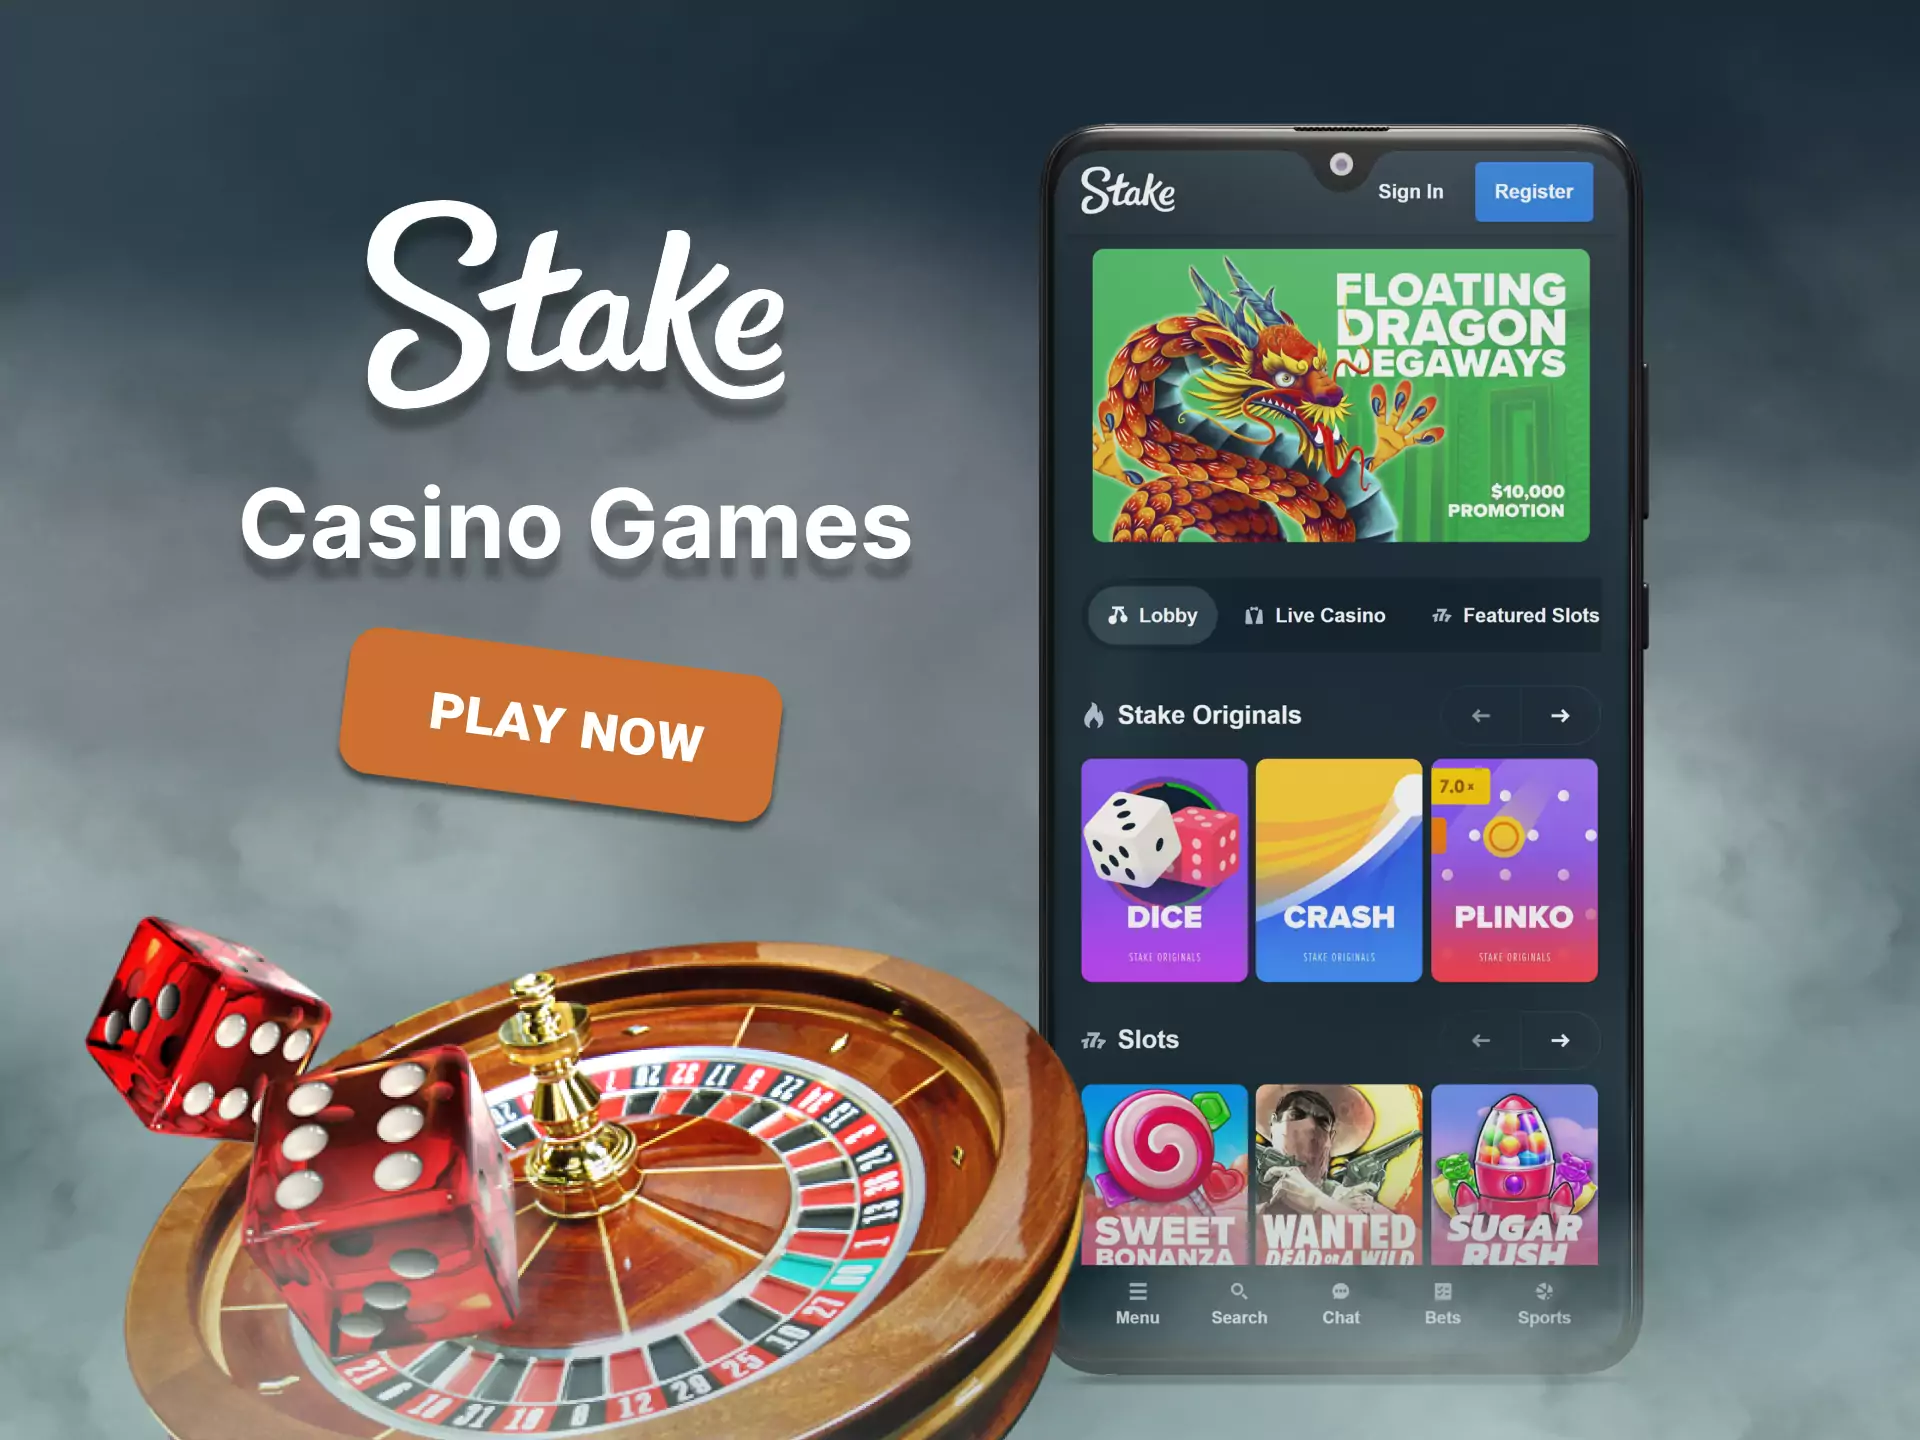 At the casino Stake.com there are lots of different games.